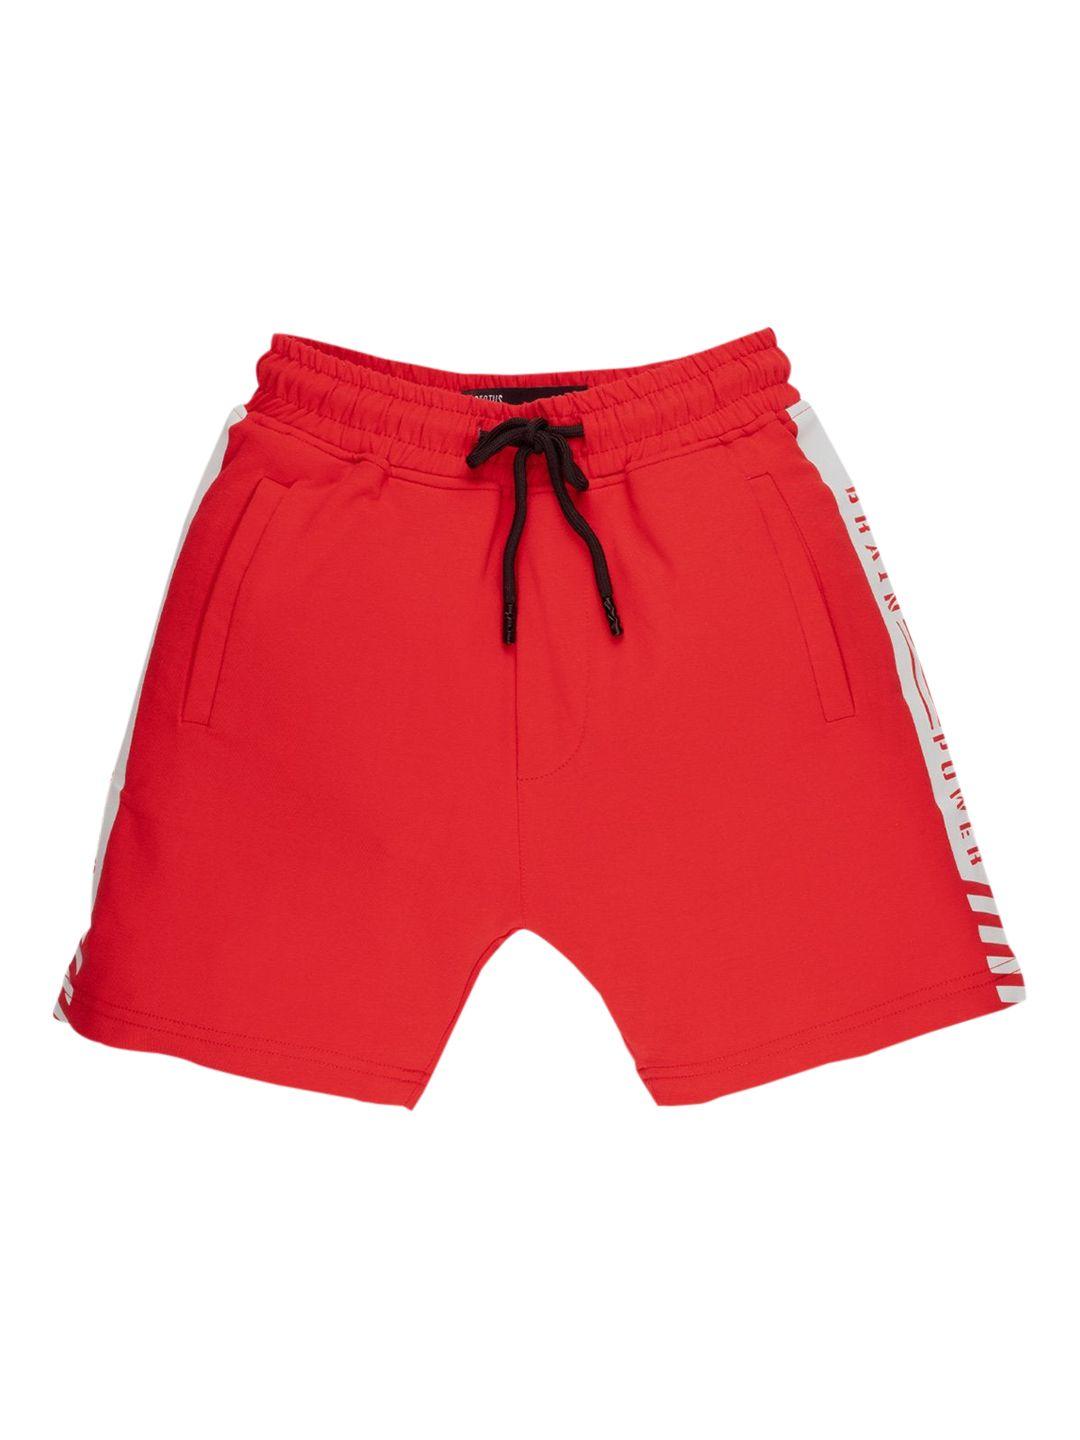 status quo boys red mid-rise shorts